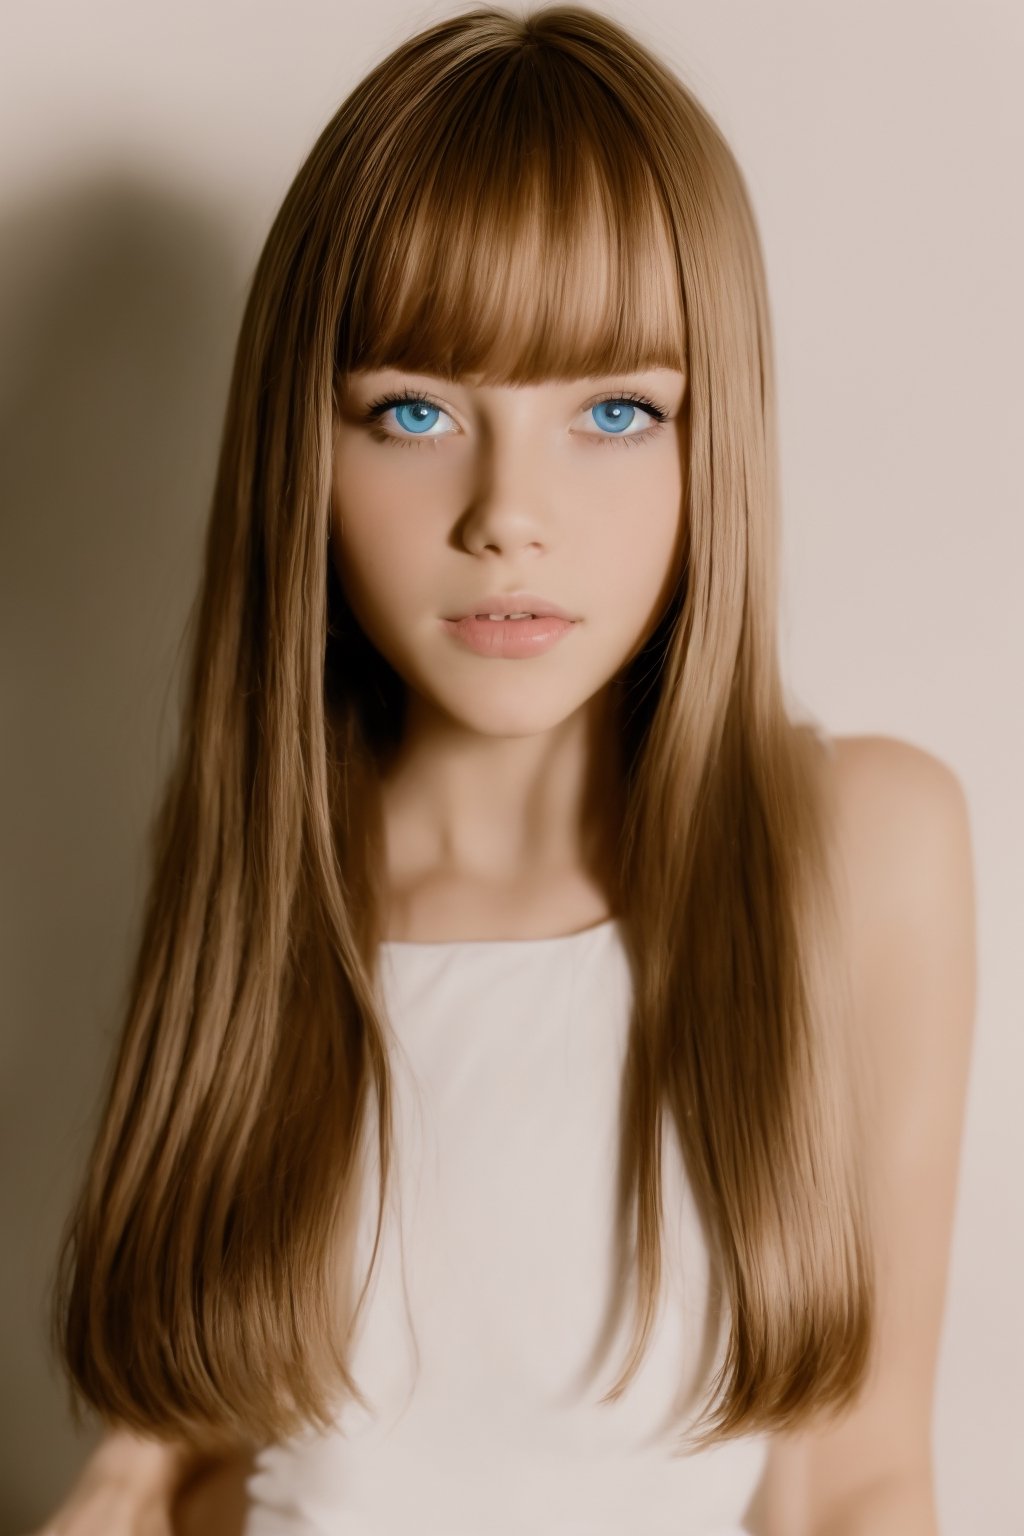 1girl, 18 y.o. English girl, full body shot, standing, face in frame, looks at viewer,
tight shiny black latex mini-Dress, black high heel shoes, ALL white background, Extremely beautiful by English standards.
photo of perfecteyes, eyes, symmetrical pale blue eyes, long thin blond hair, beauty, focus on the face, straight thin blonde hair, Beautiful eyes ,rayen dress,GdClth,Nice legs and hot body,greatfa